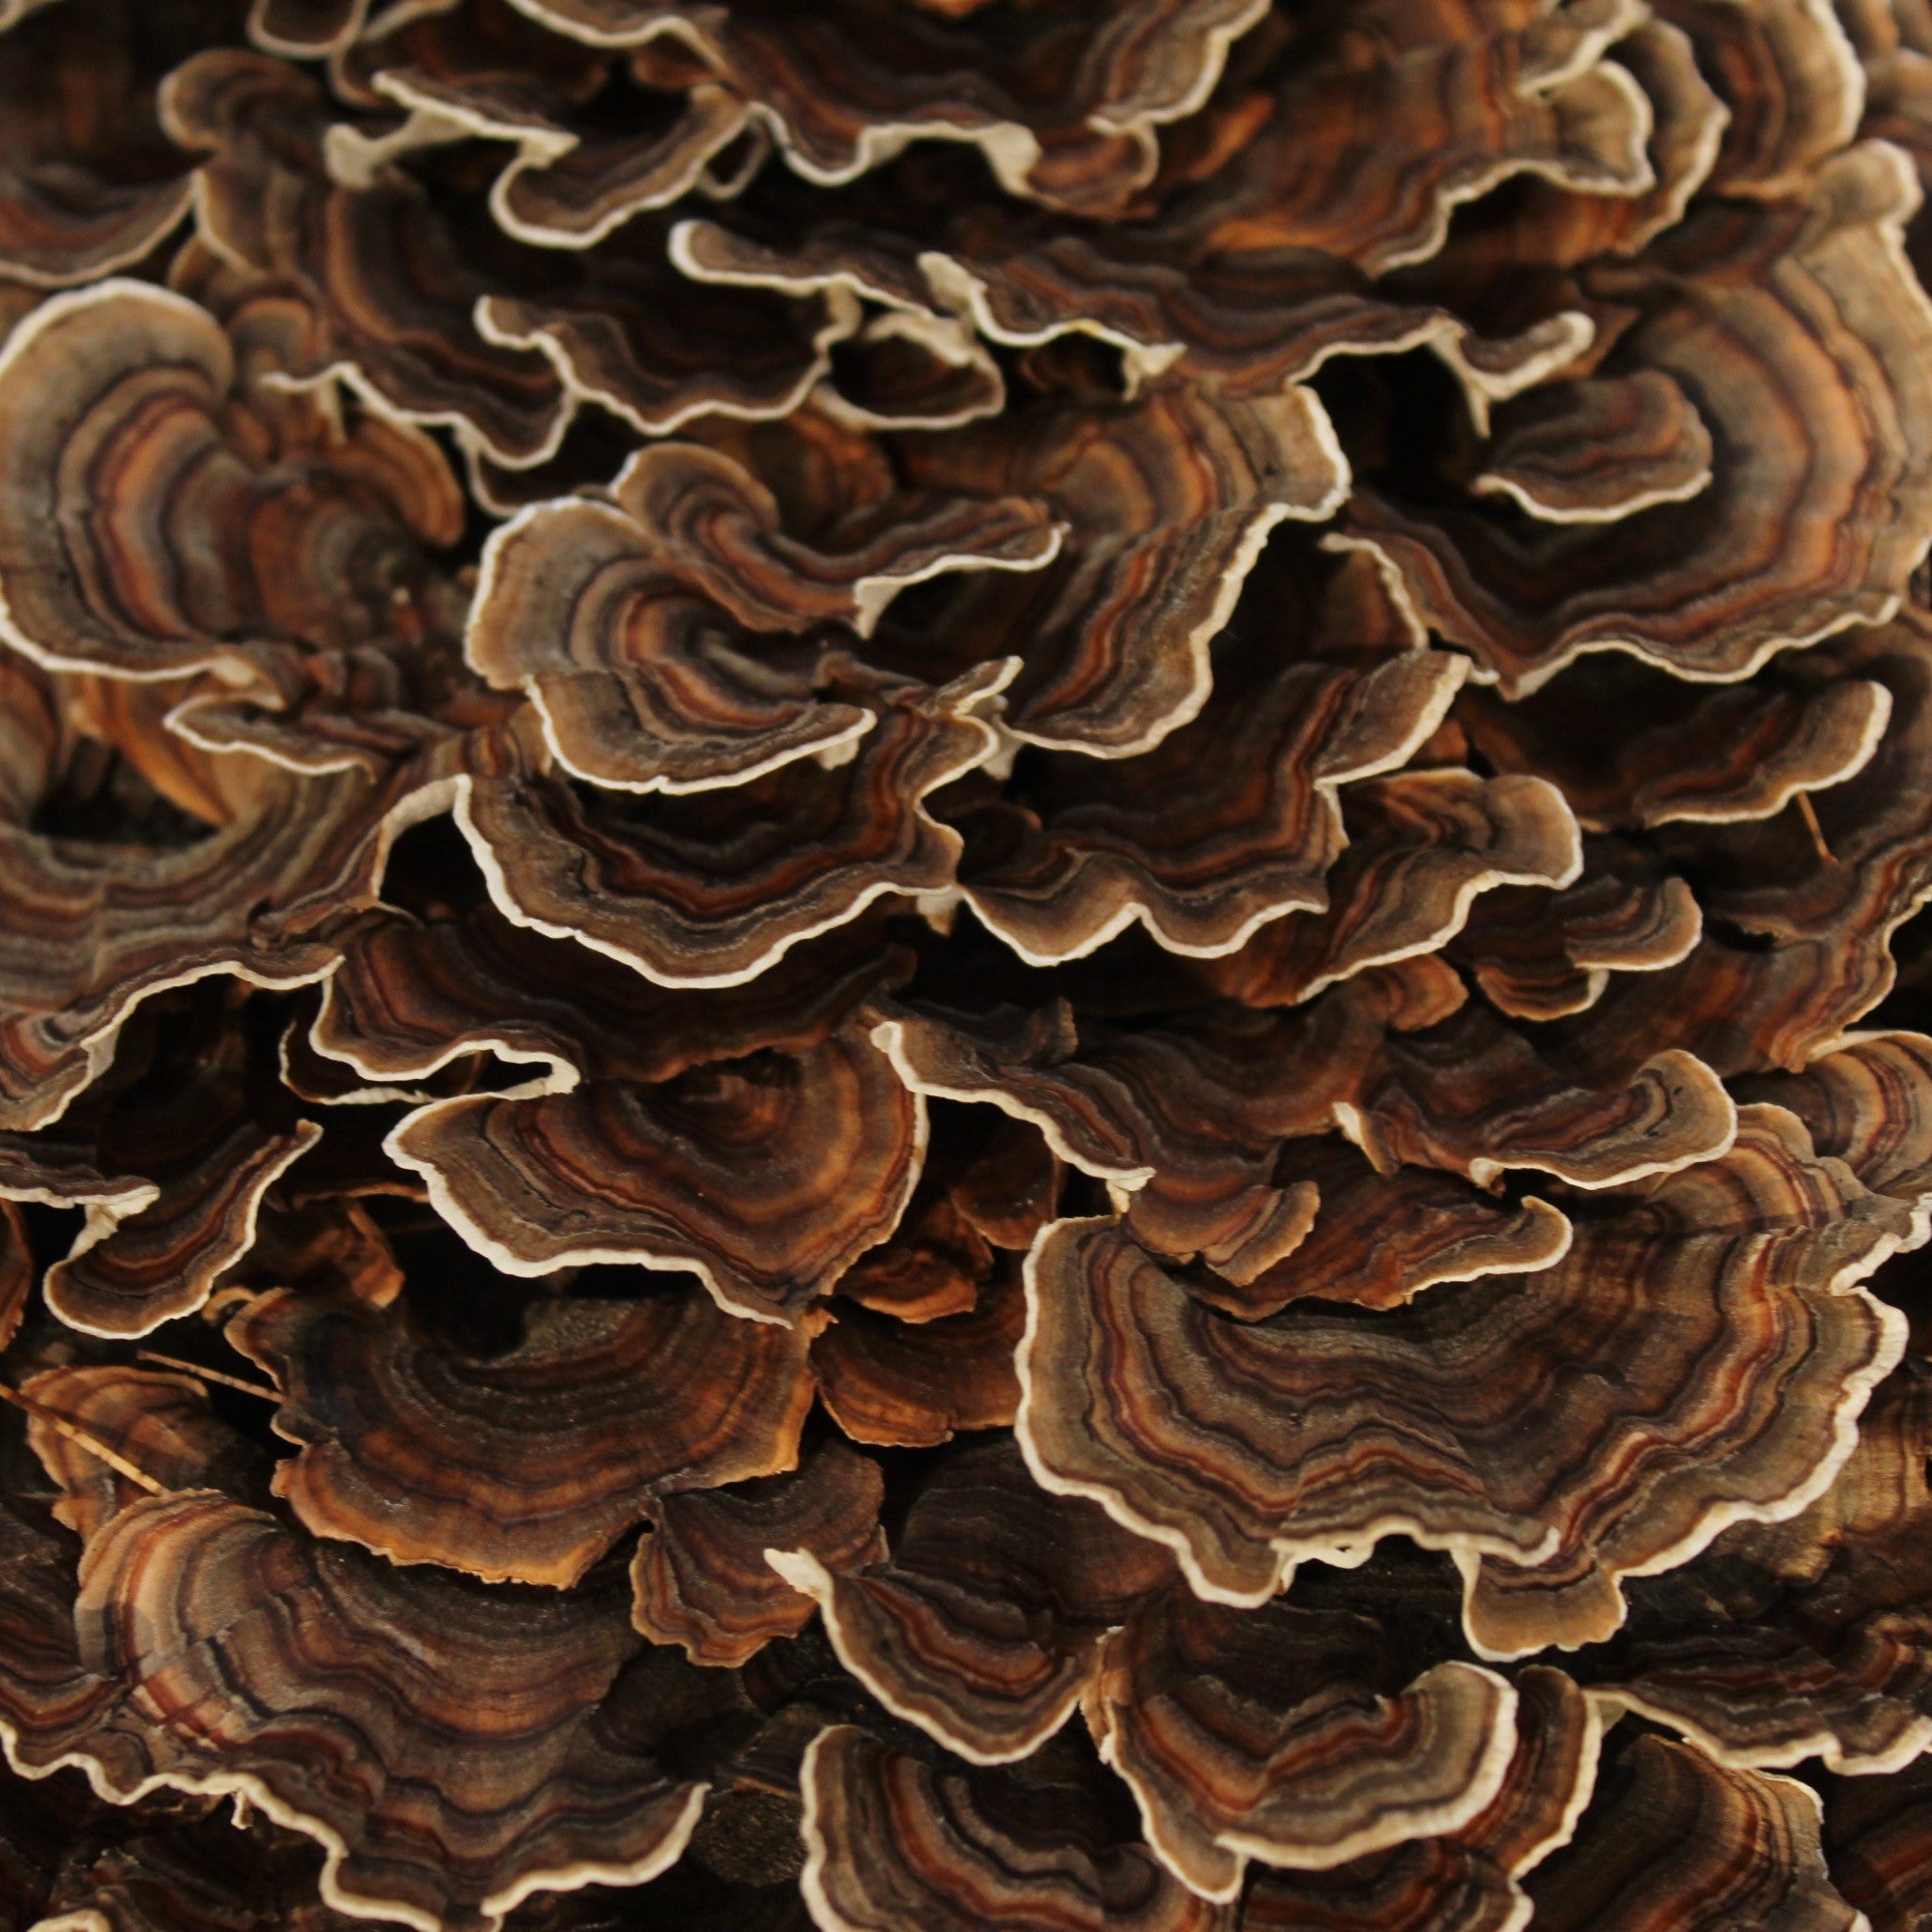 Why is Turkey Tail One of the Most-Studied Mushrooms on the Planet?